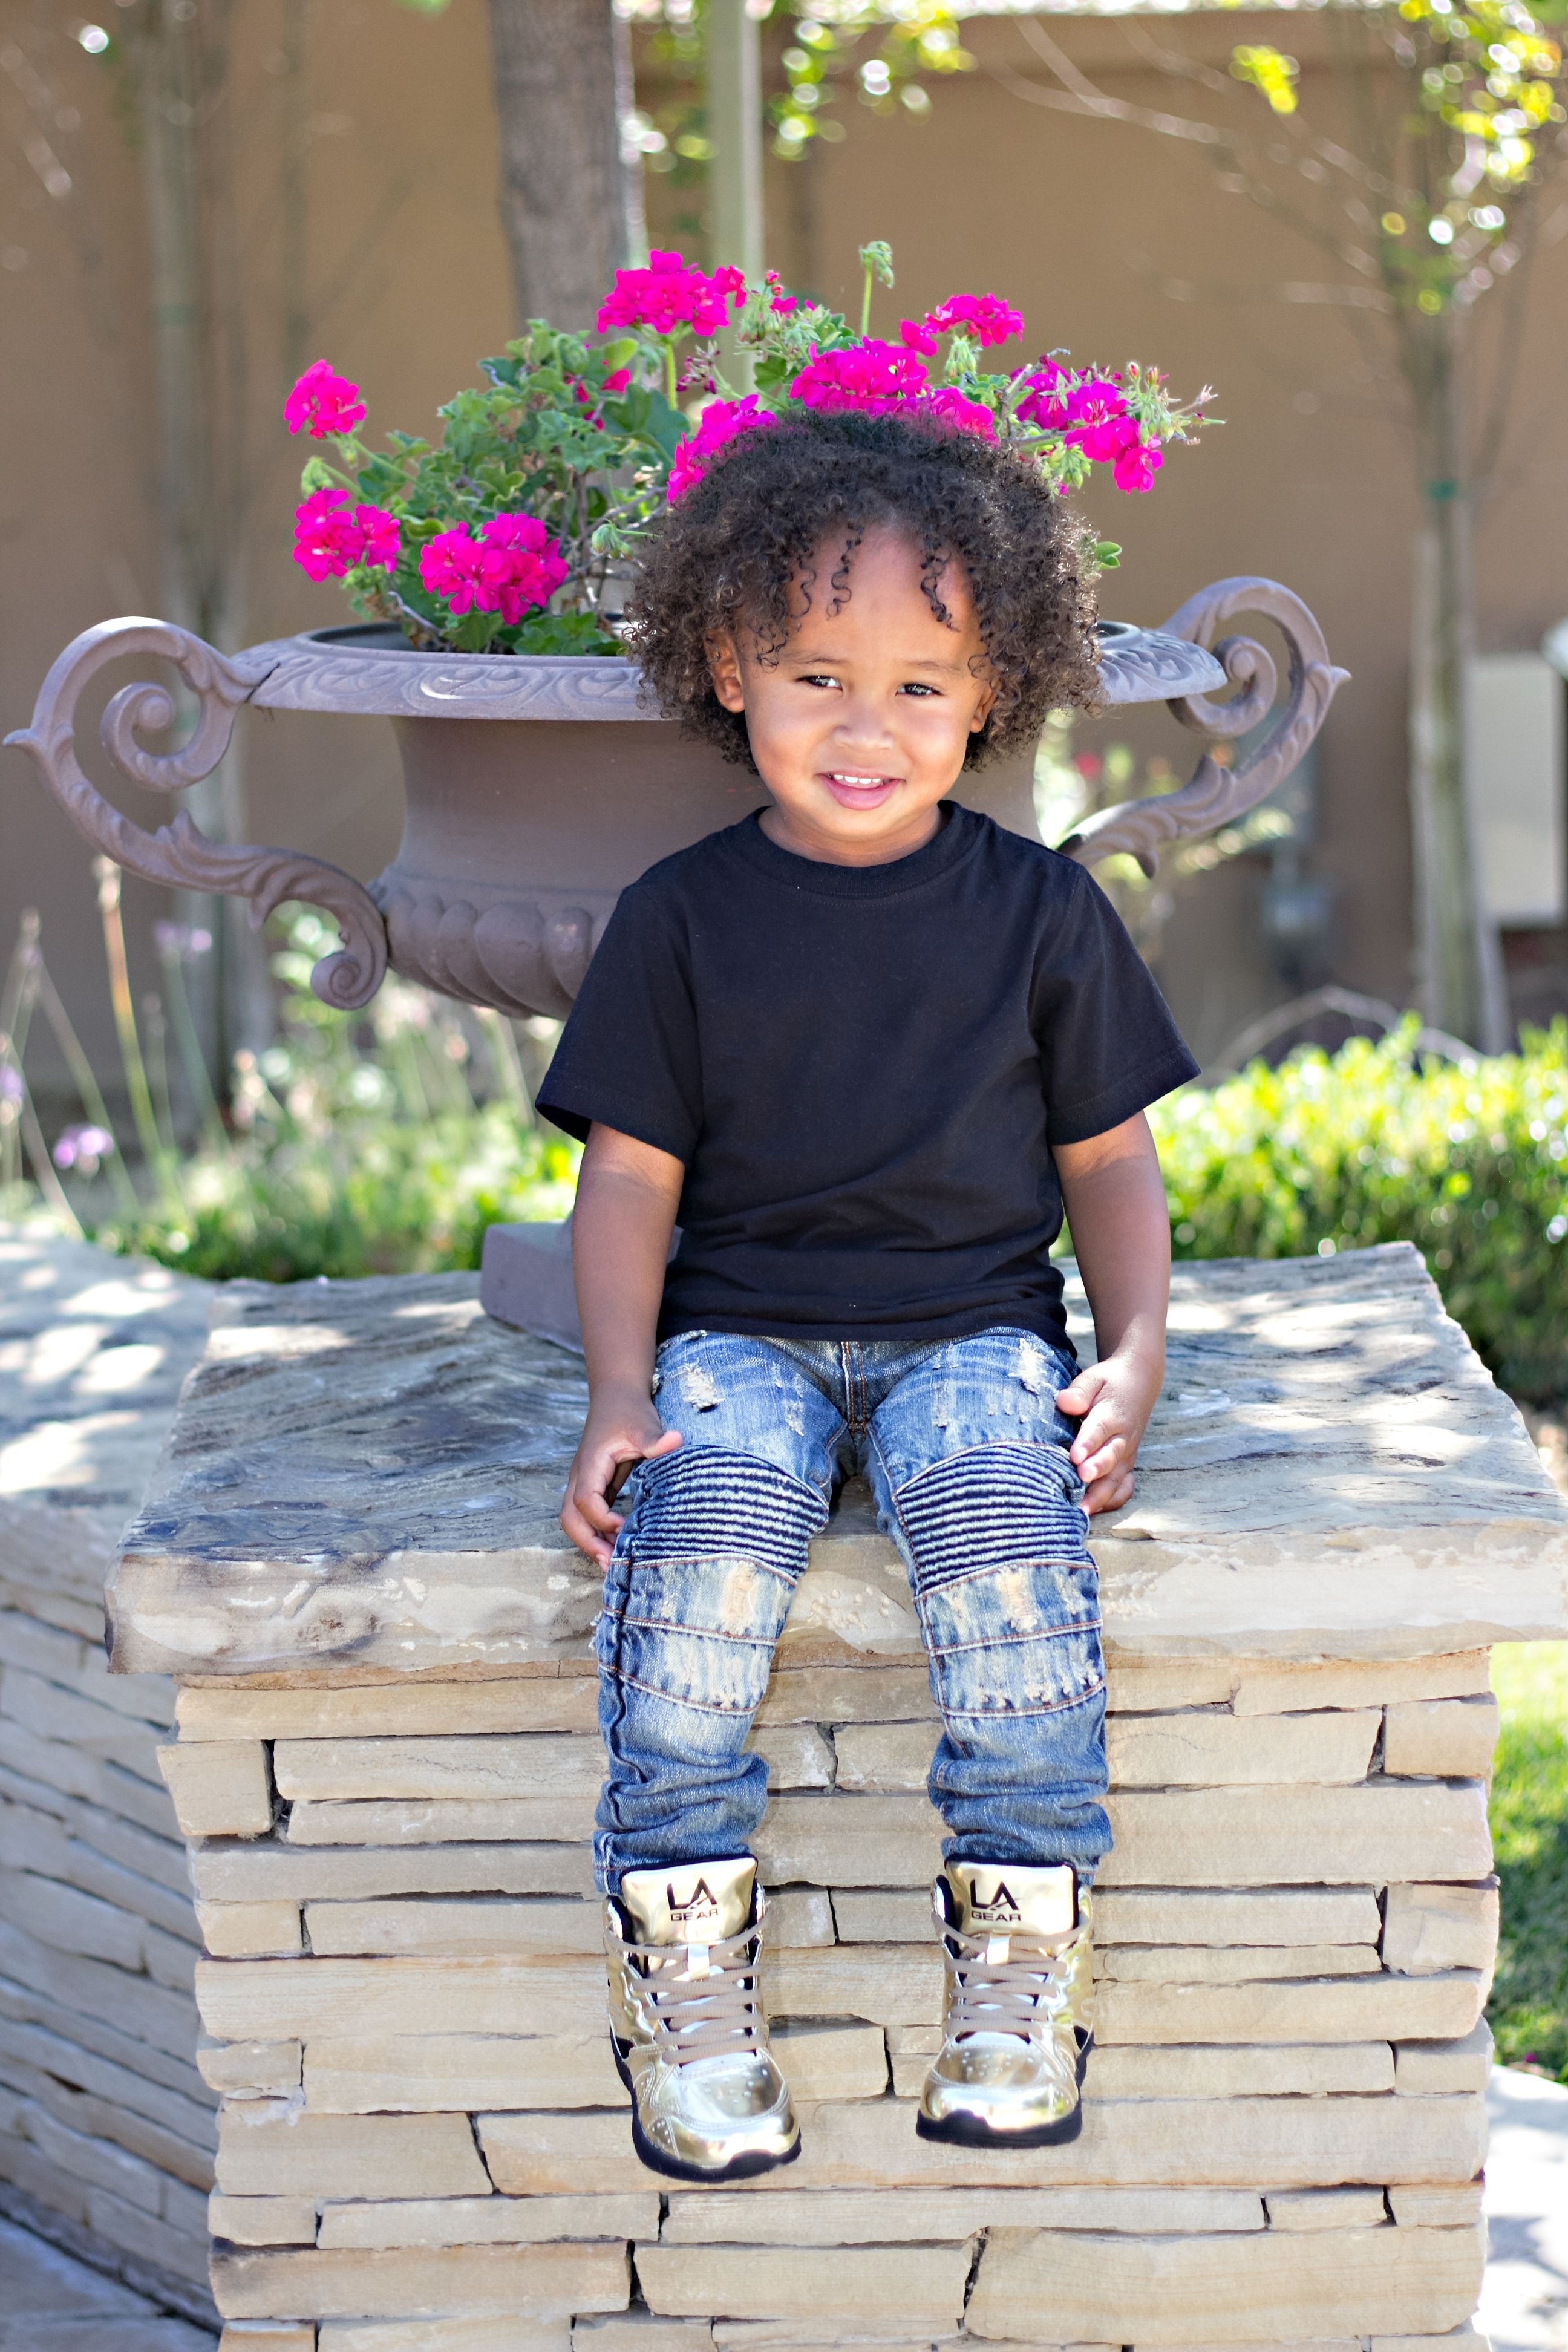 King Cairo on August 29, 2015, in Los Angeles, California. | Source: Getty Imges